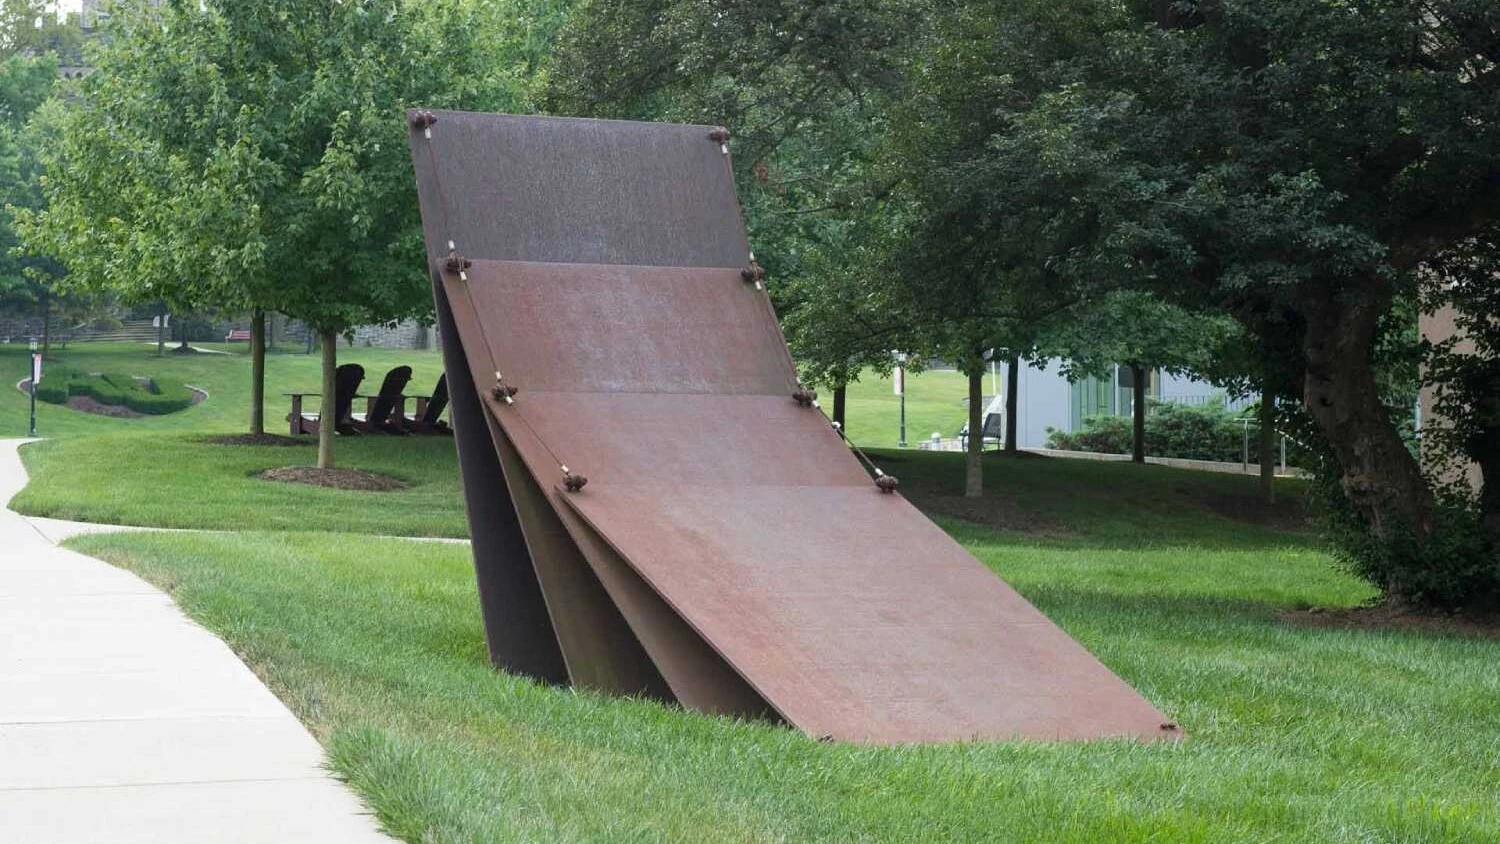 a large metal sculpture that is reminiscent of dominoes falling